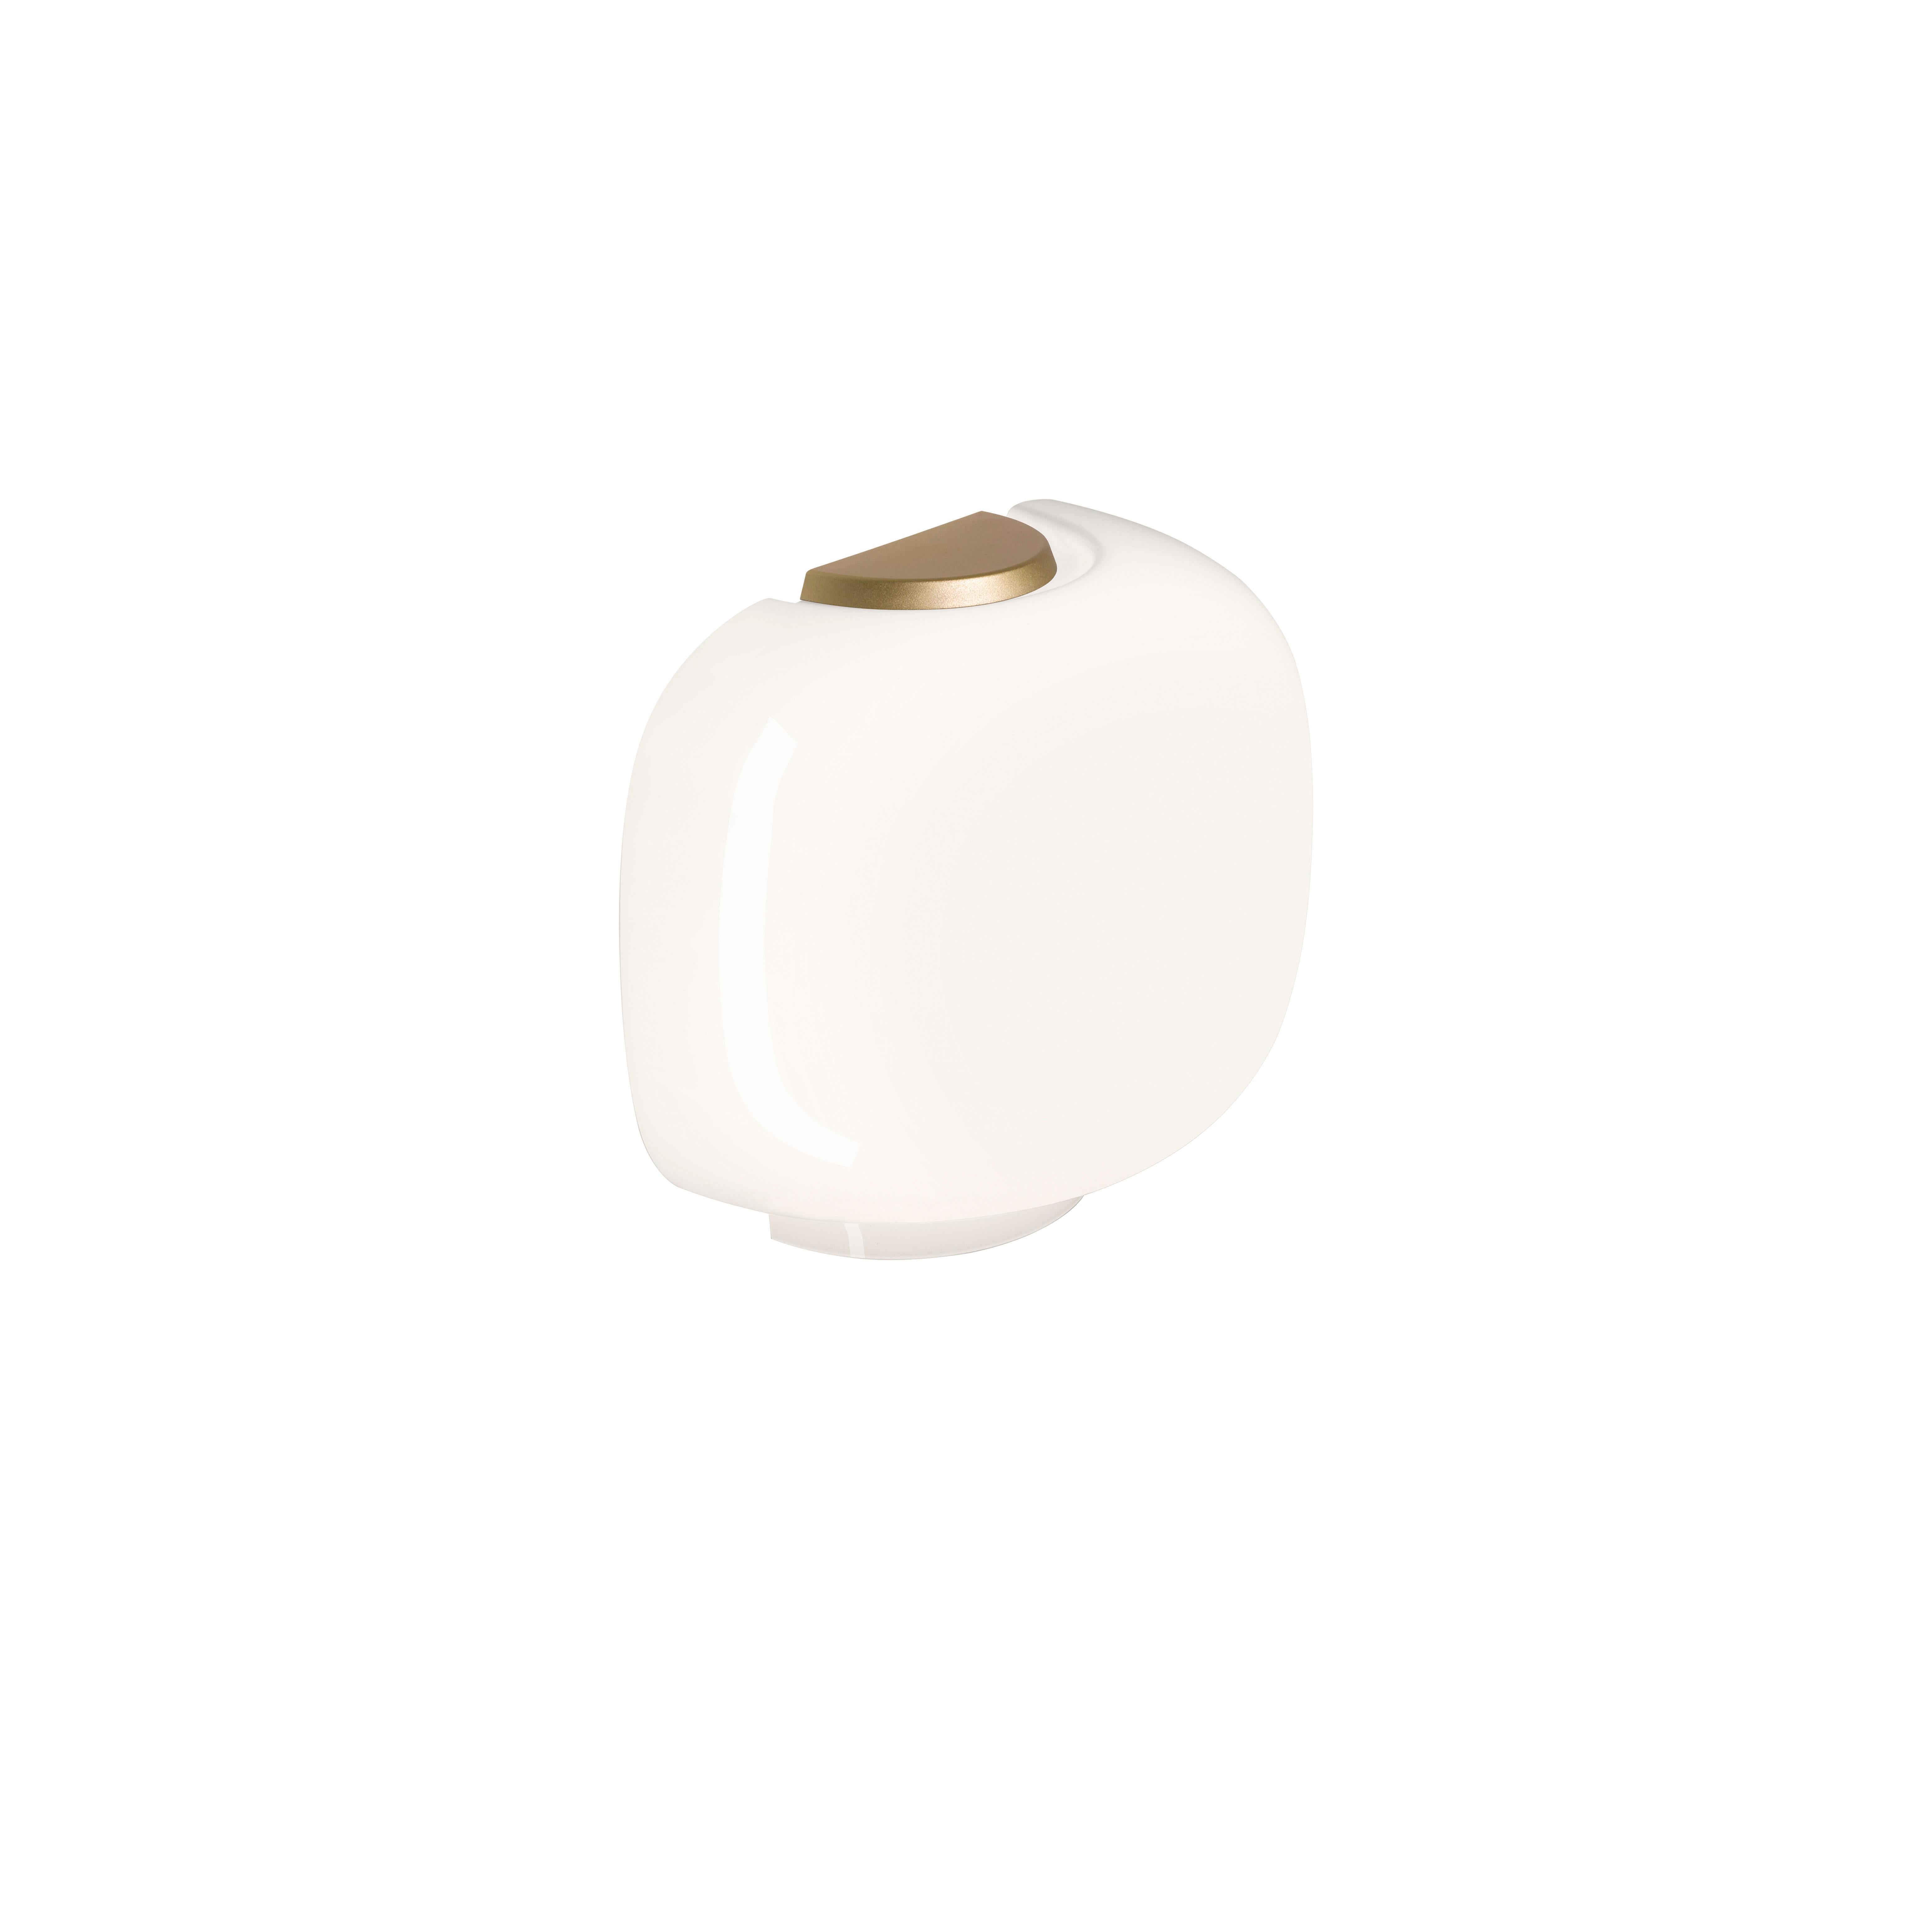 A personal, discreet form in shiny blown glass, for a glare-free, warm and gentle glow.

Materials:
Lacquered blow glass.

Light Source:
Max 1x30W E26

Color:
White, Gold, Graphite

Light Bulbs not included